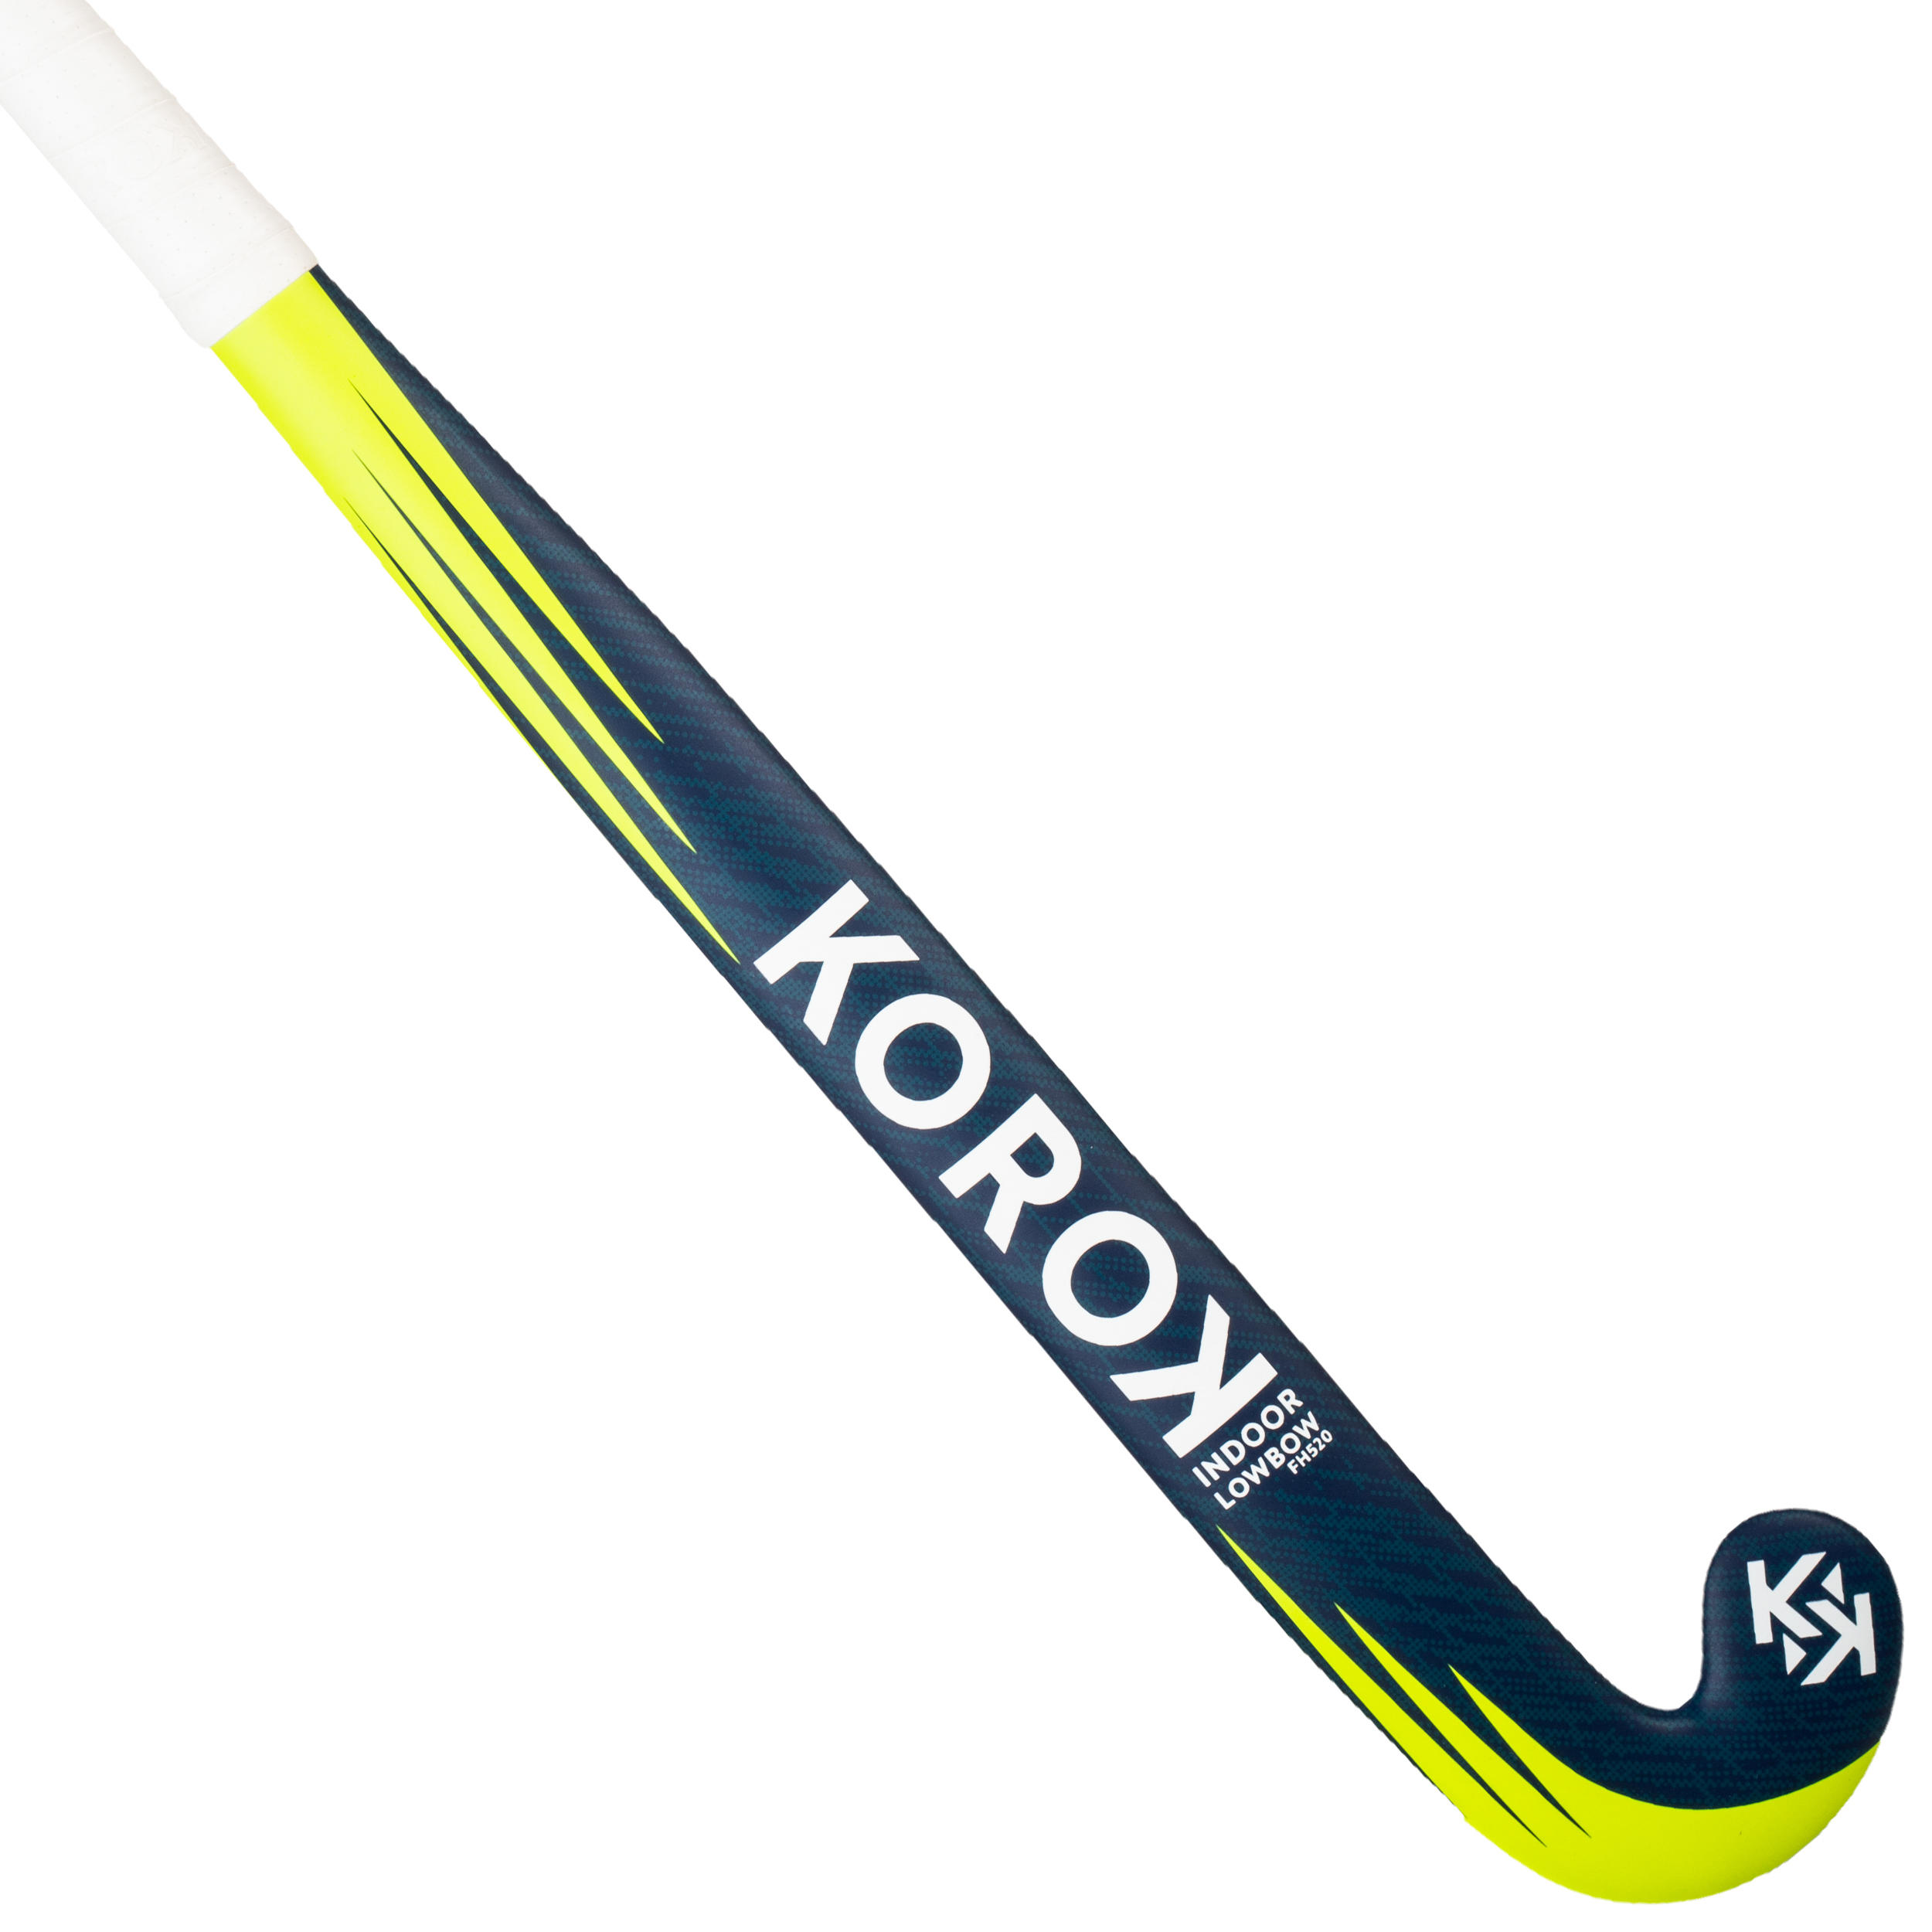 KOROK Adult Intermediate 20% Carbon Low Bow Indoor Hockey Stick FH520 - Blue/Yellow